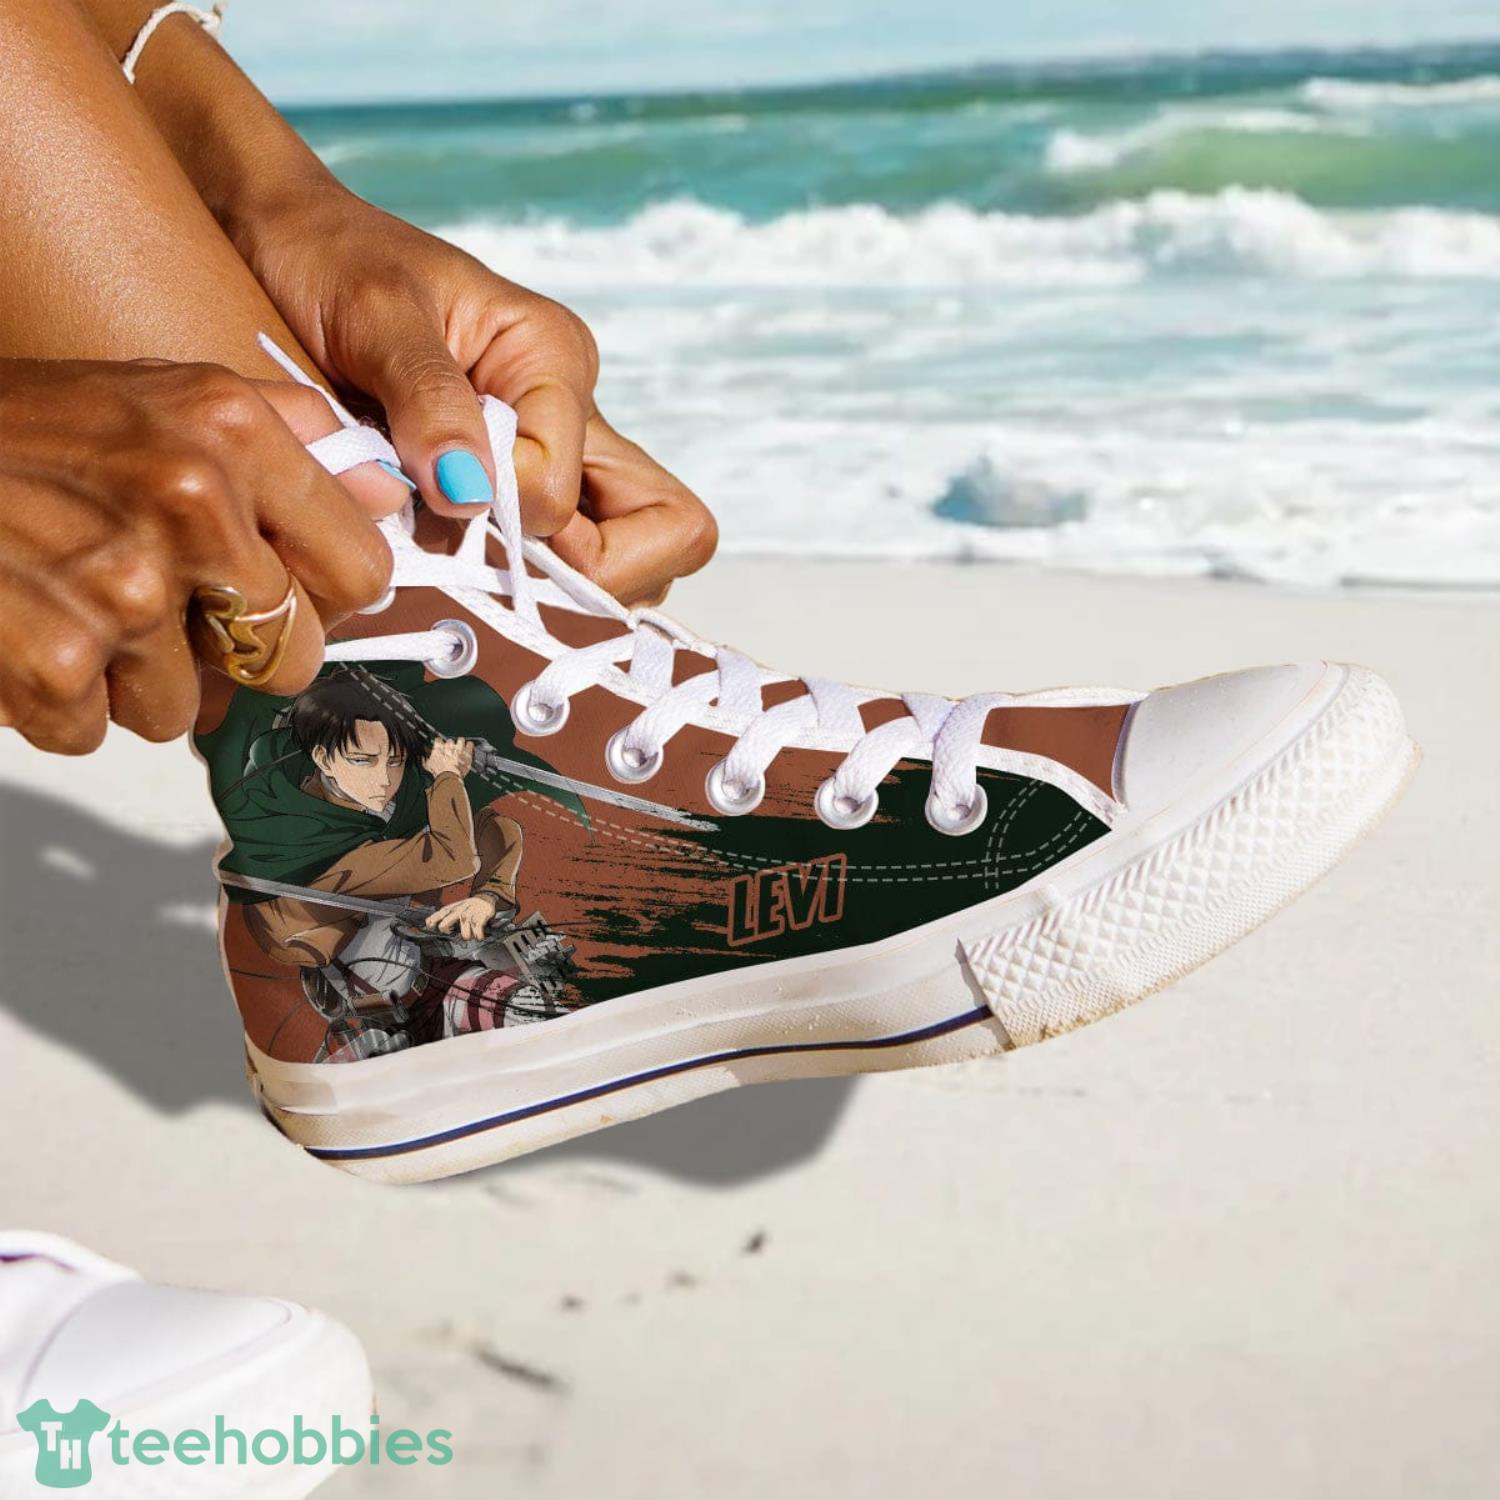 animated converse shoes